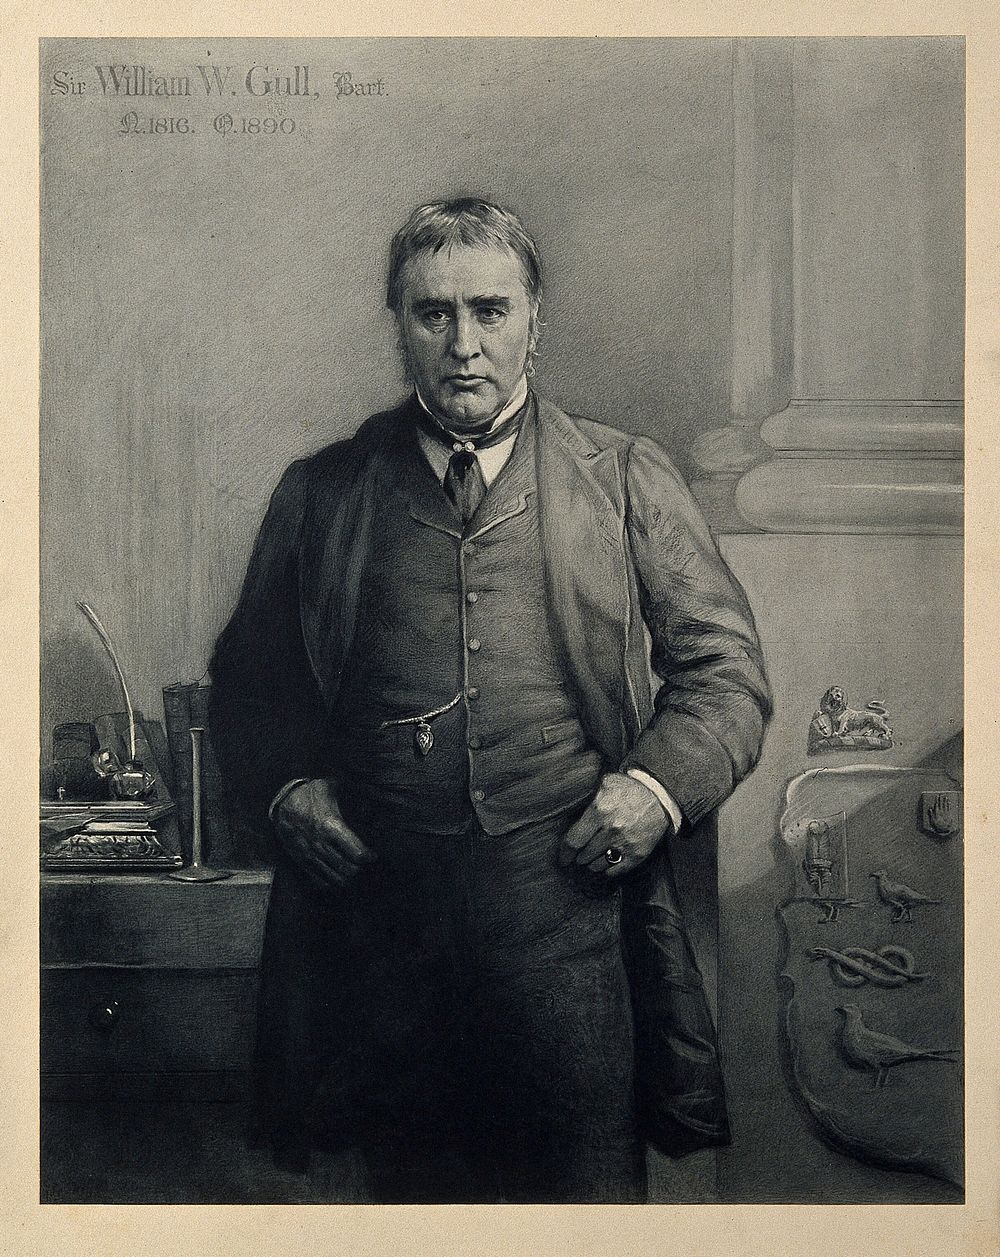 Sir William Withey Gull. Photogravure by Duclaud after Elliot & Fry.